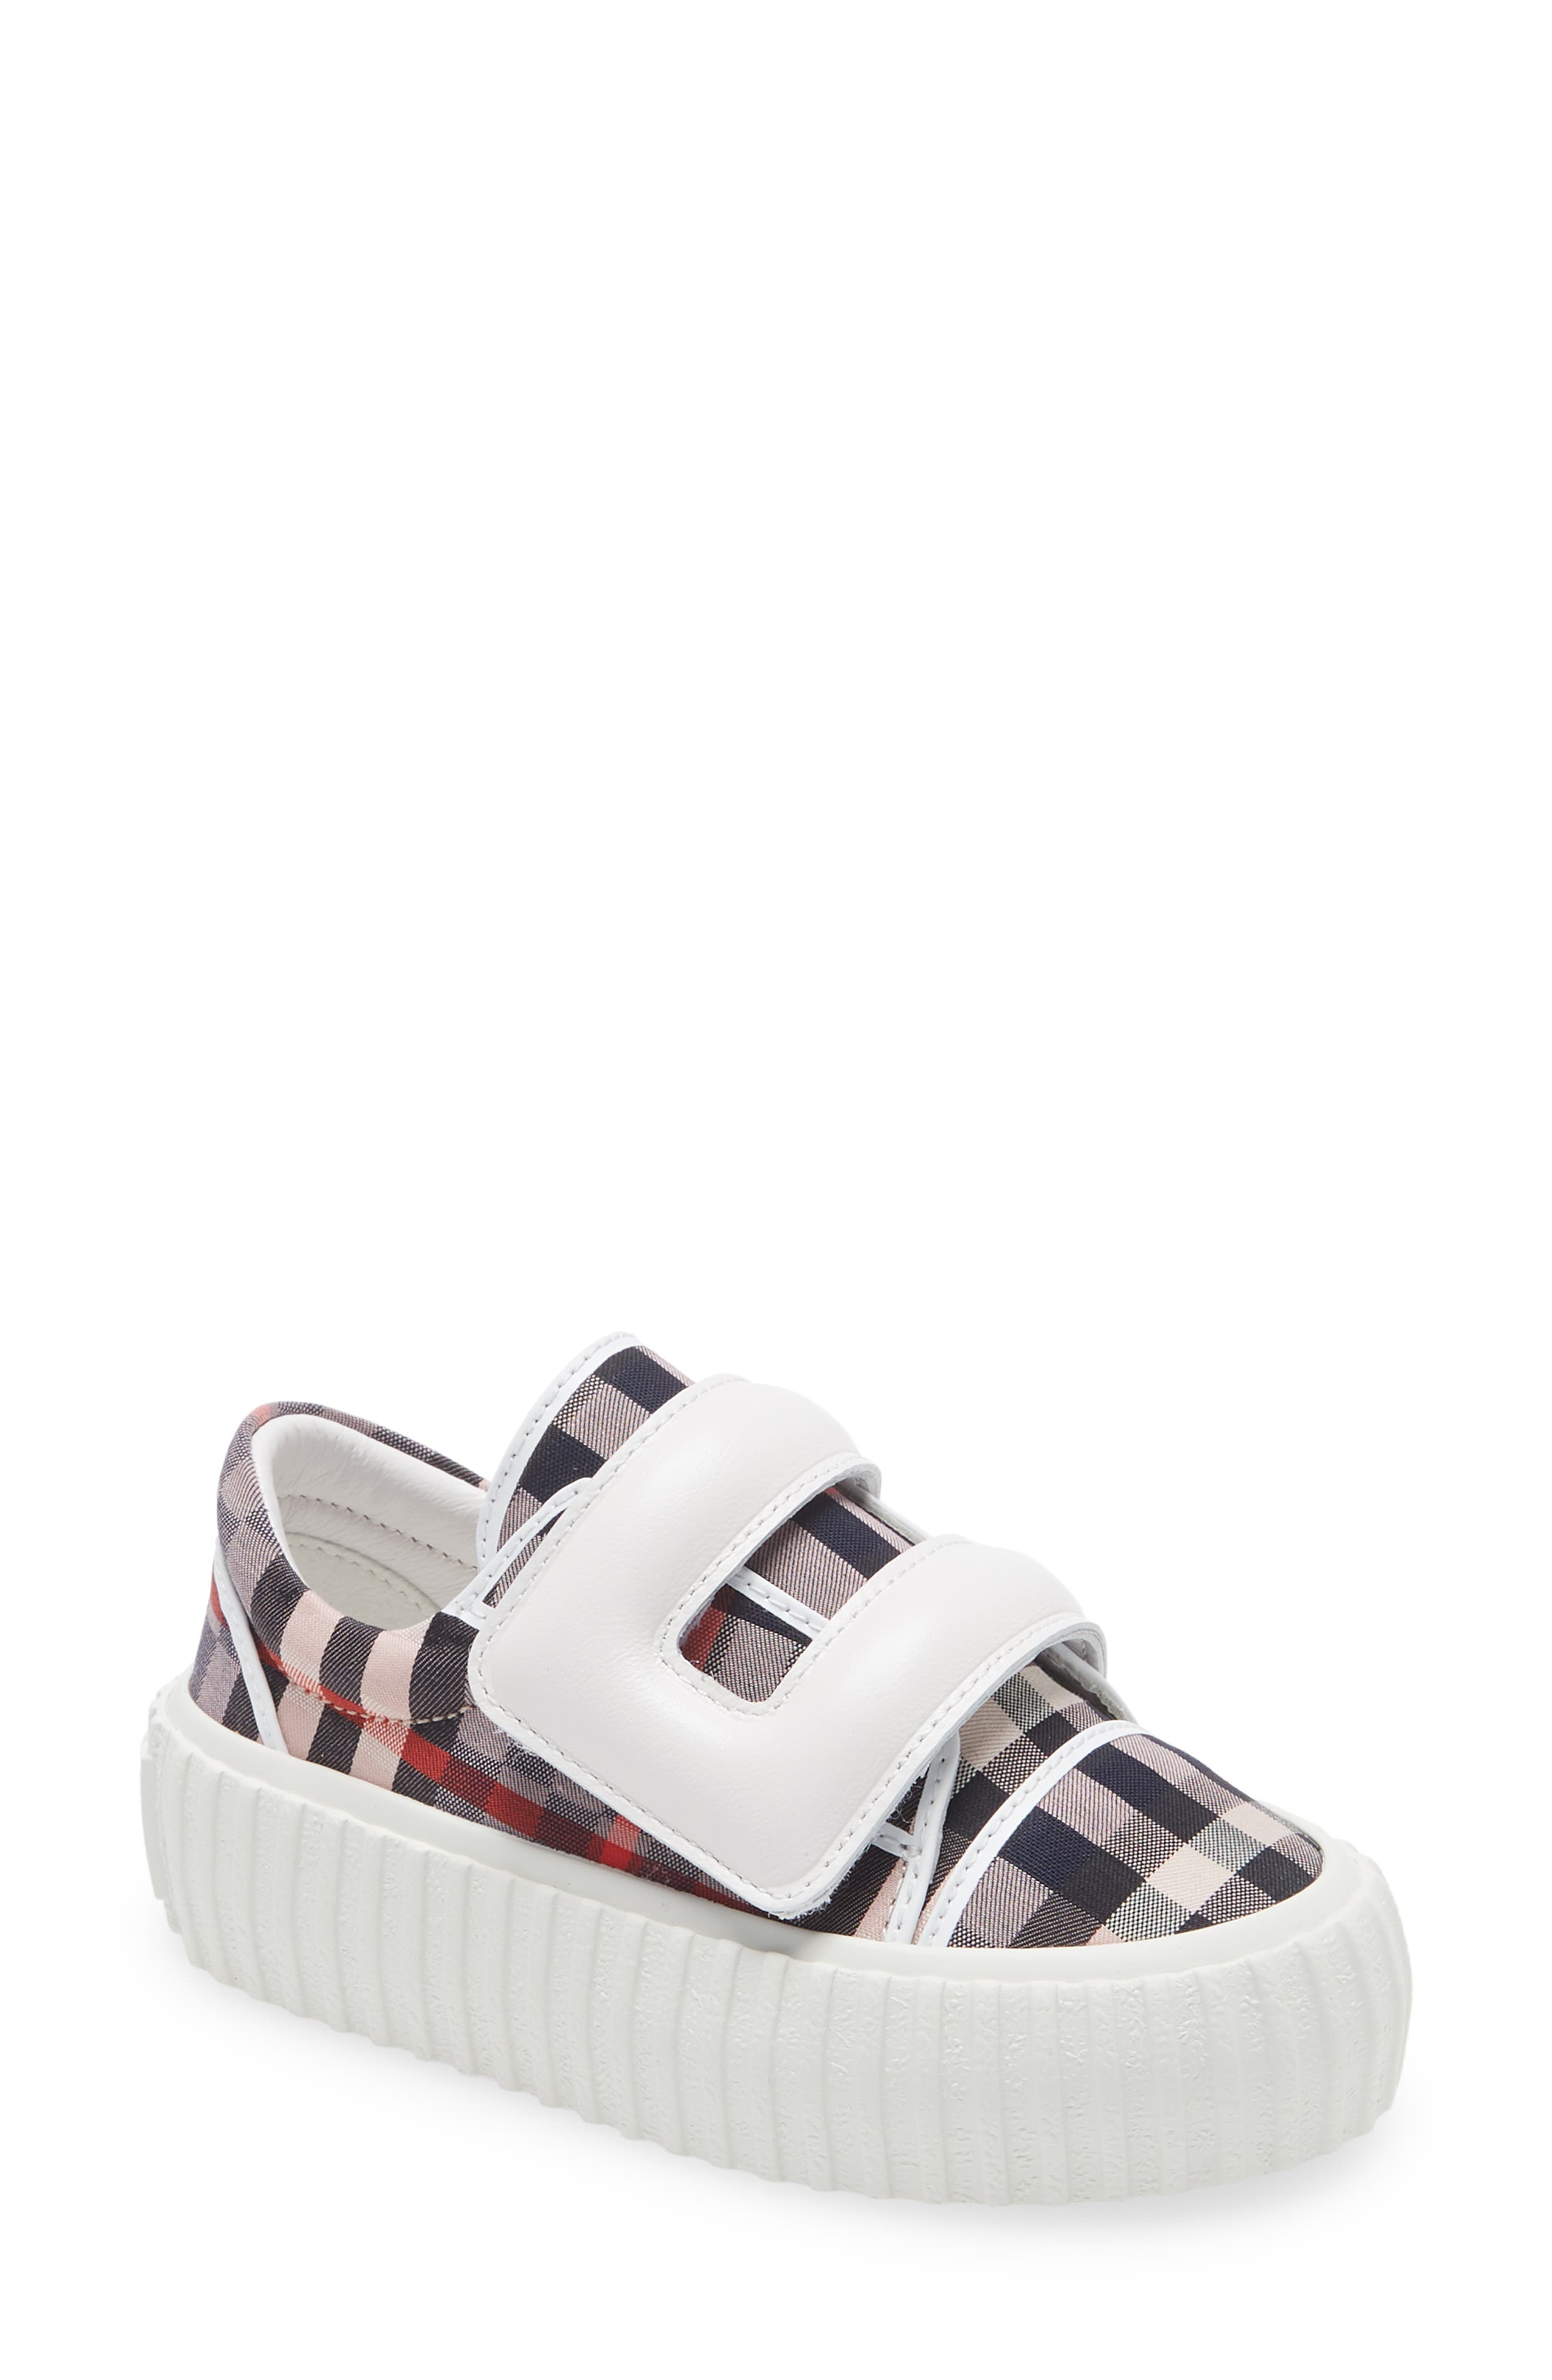 Burberry Mark Check Sneaker in Pale Rose Ip Check at Nordstrom, Size 8Us